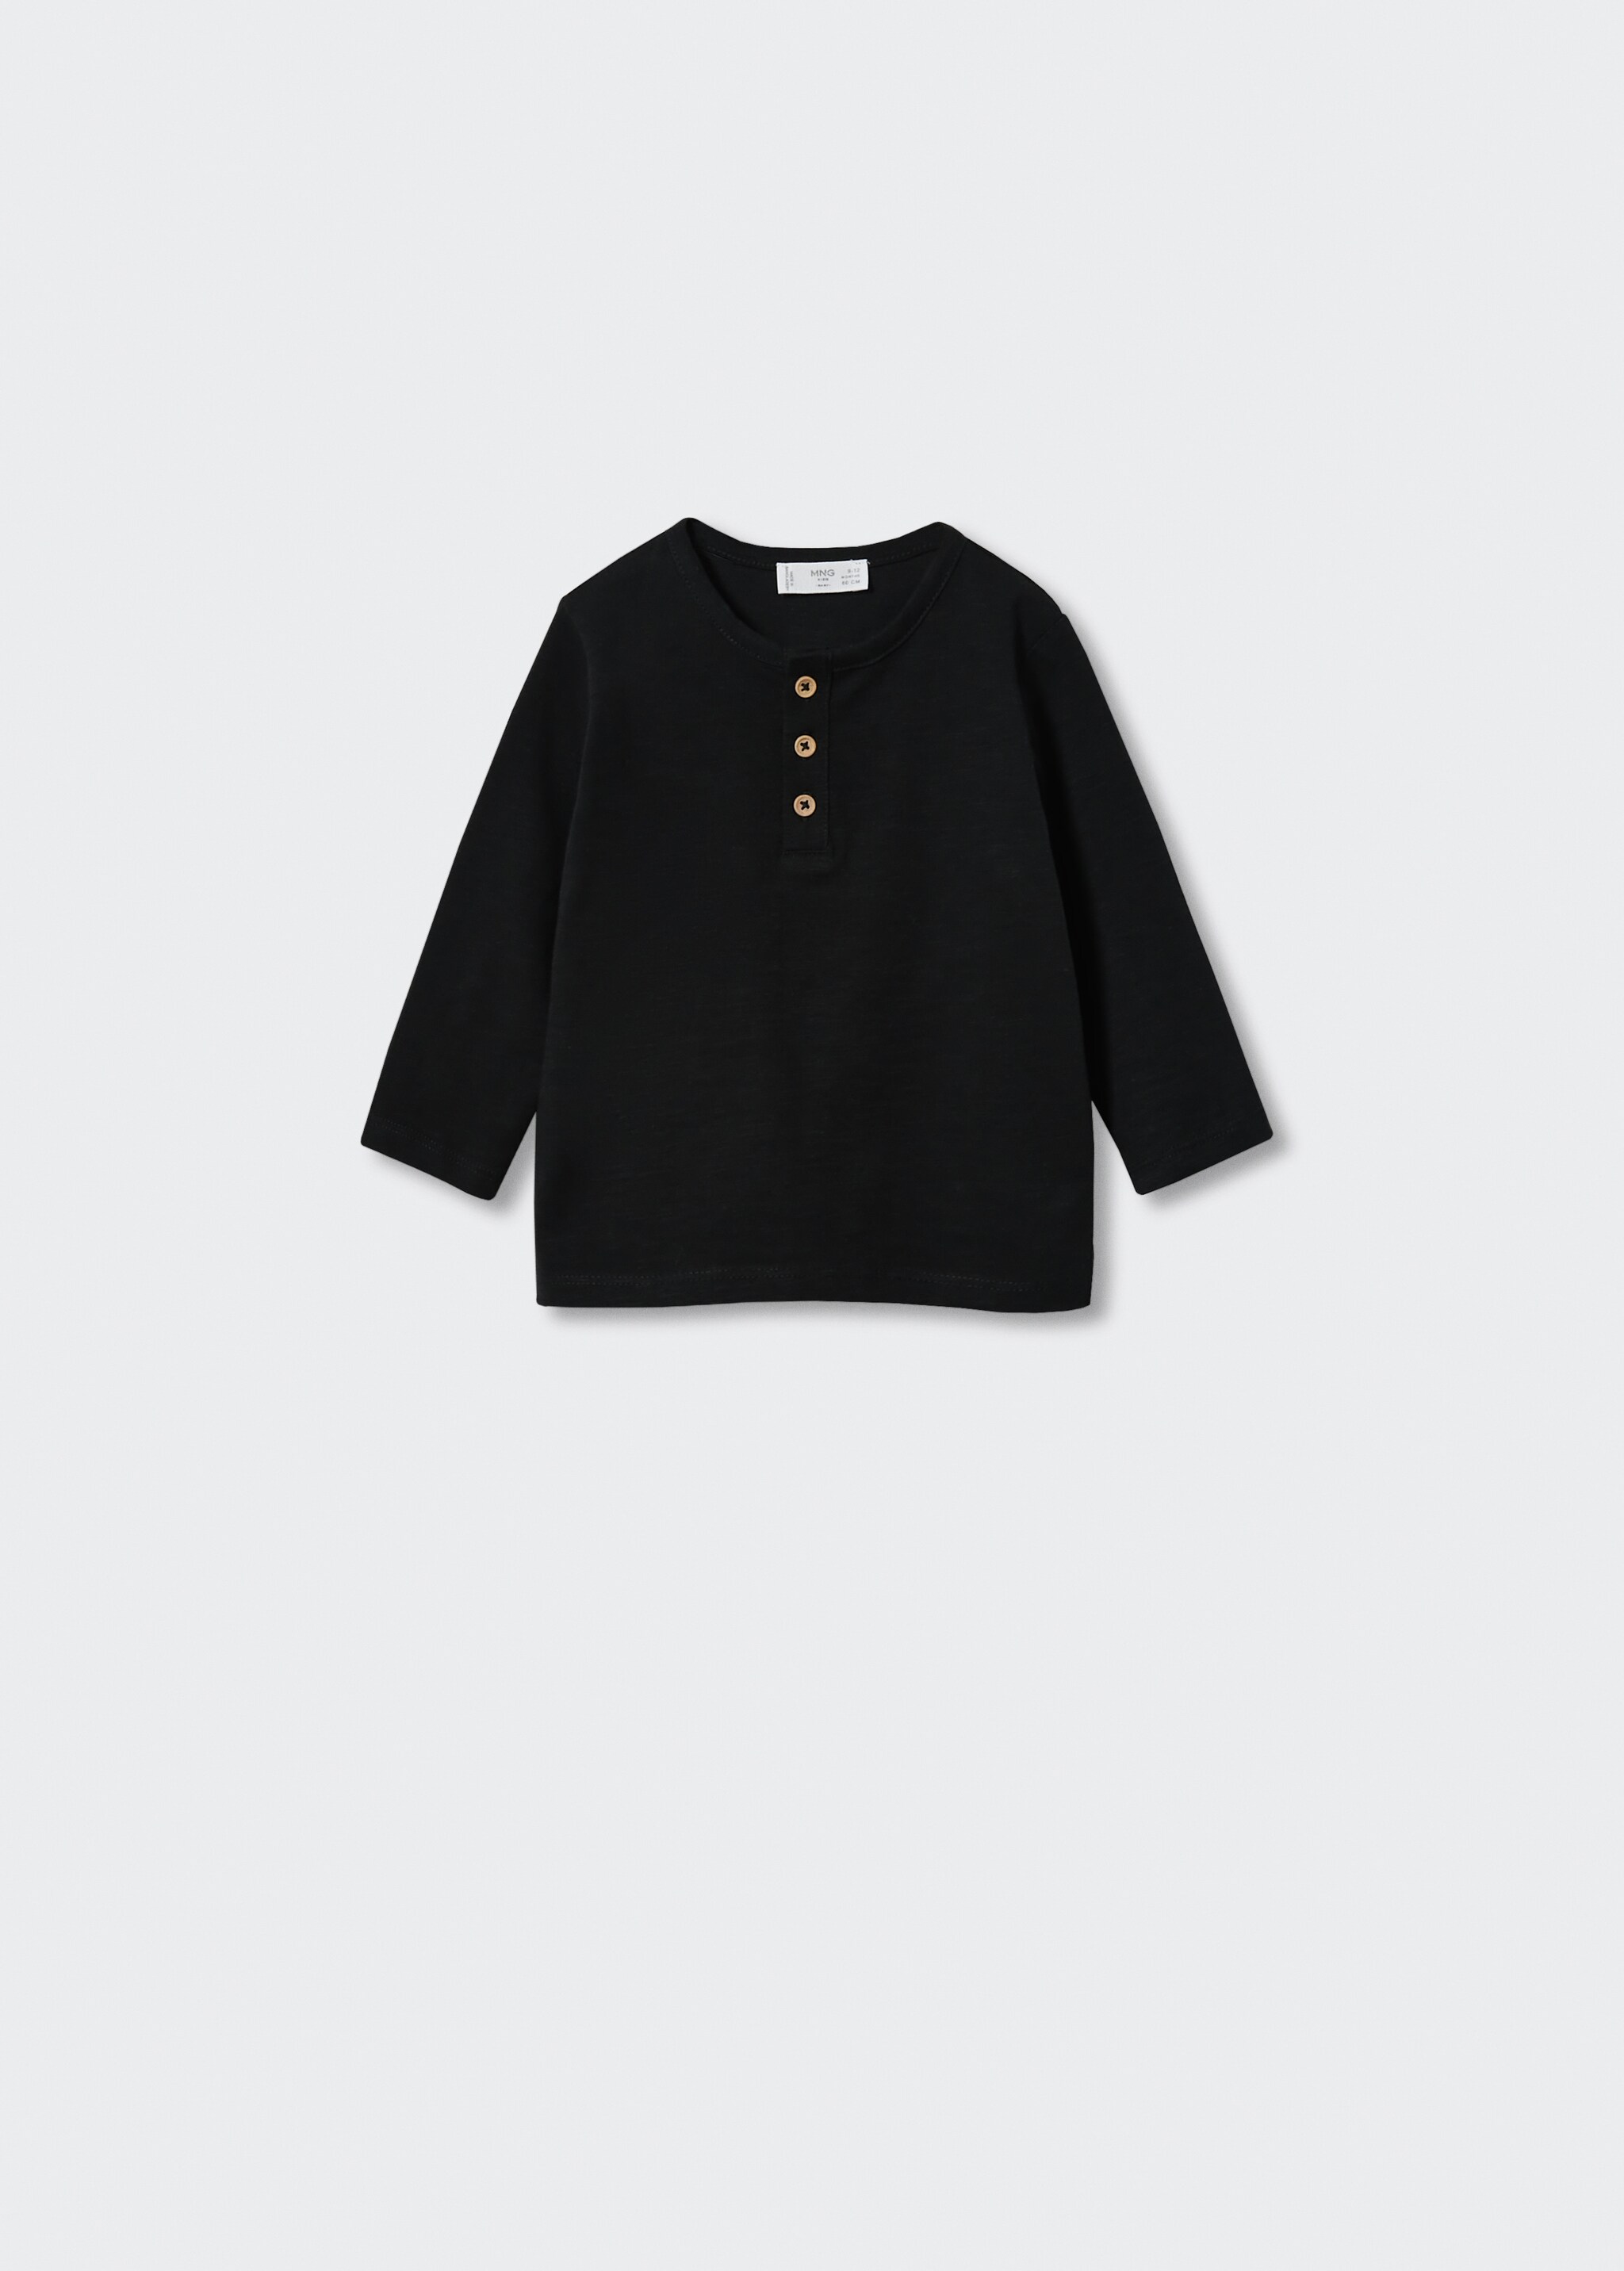 Buttoned long sleeve t-shirt - Article without model